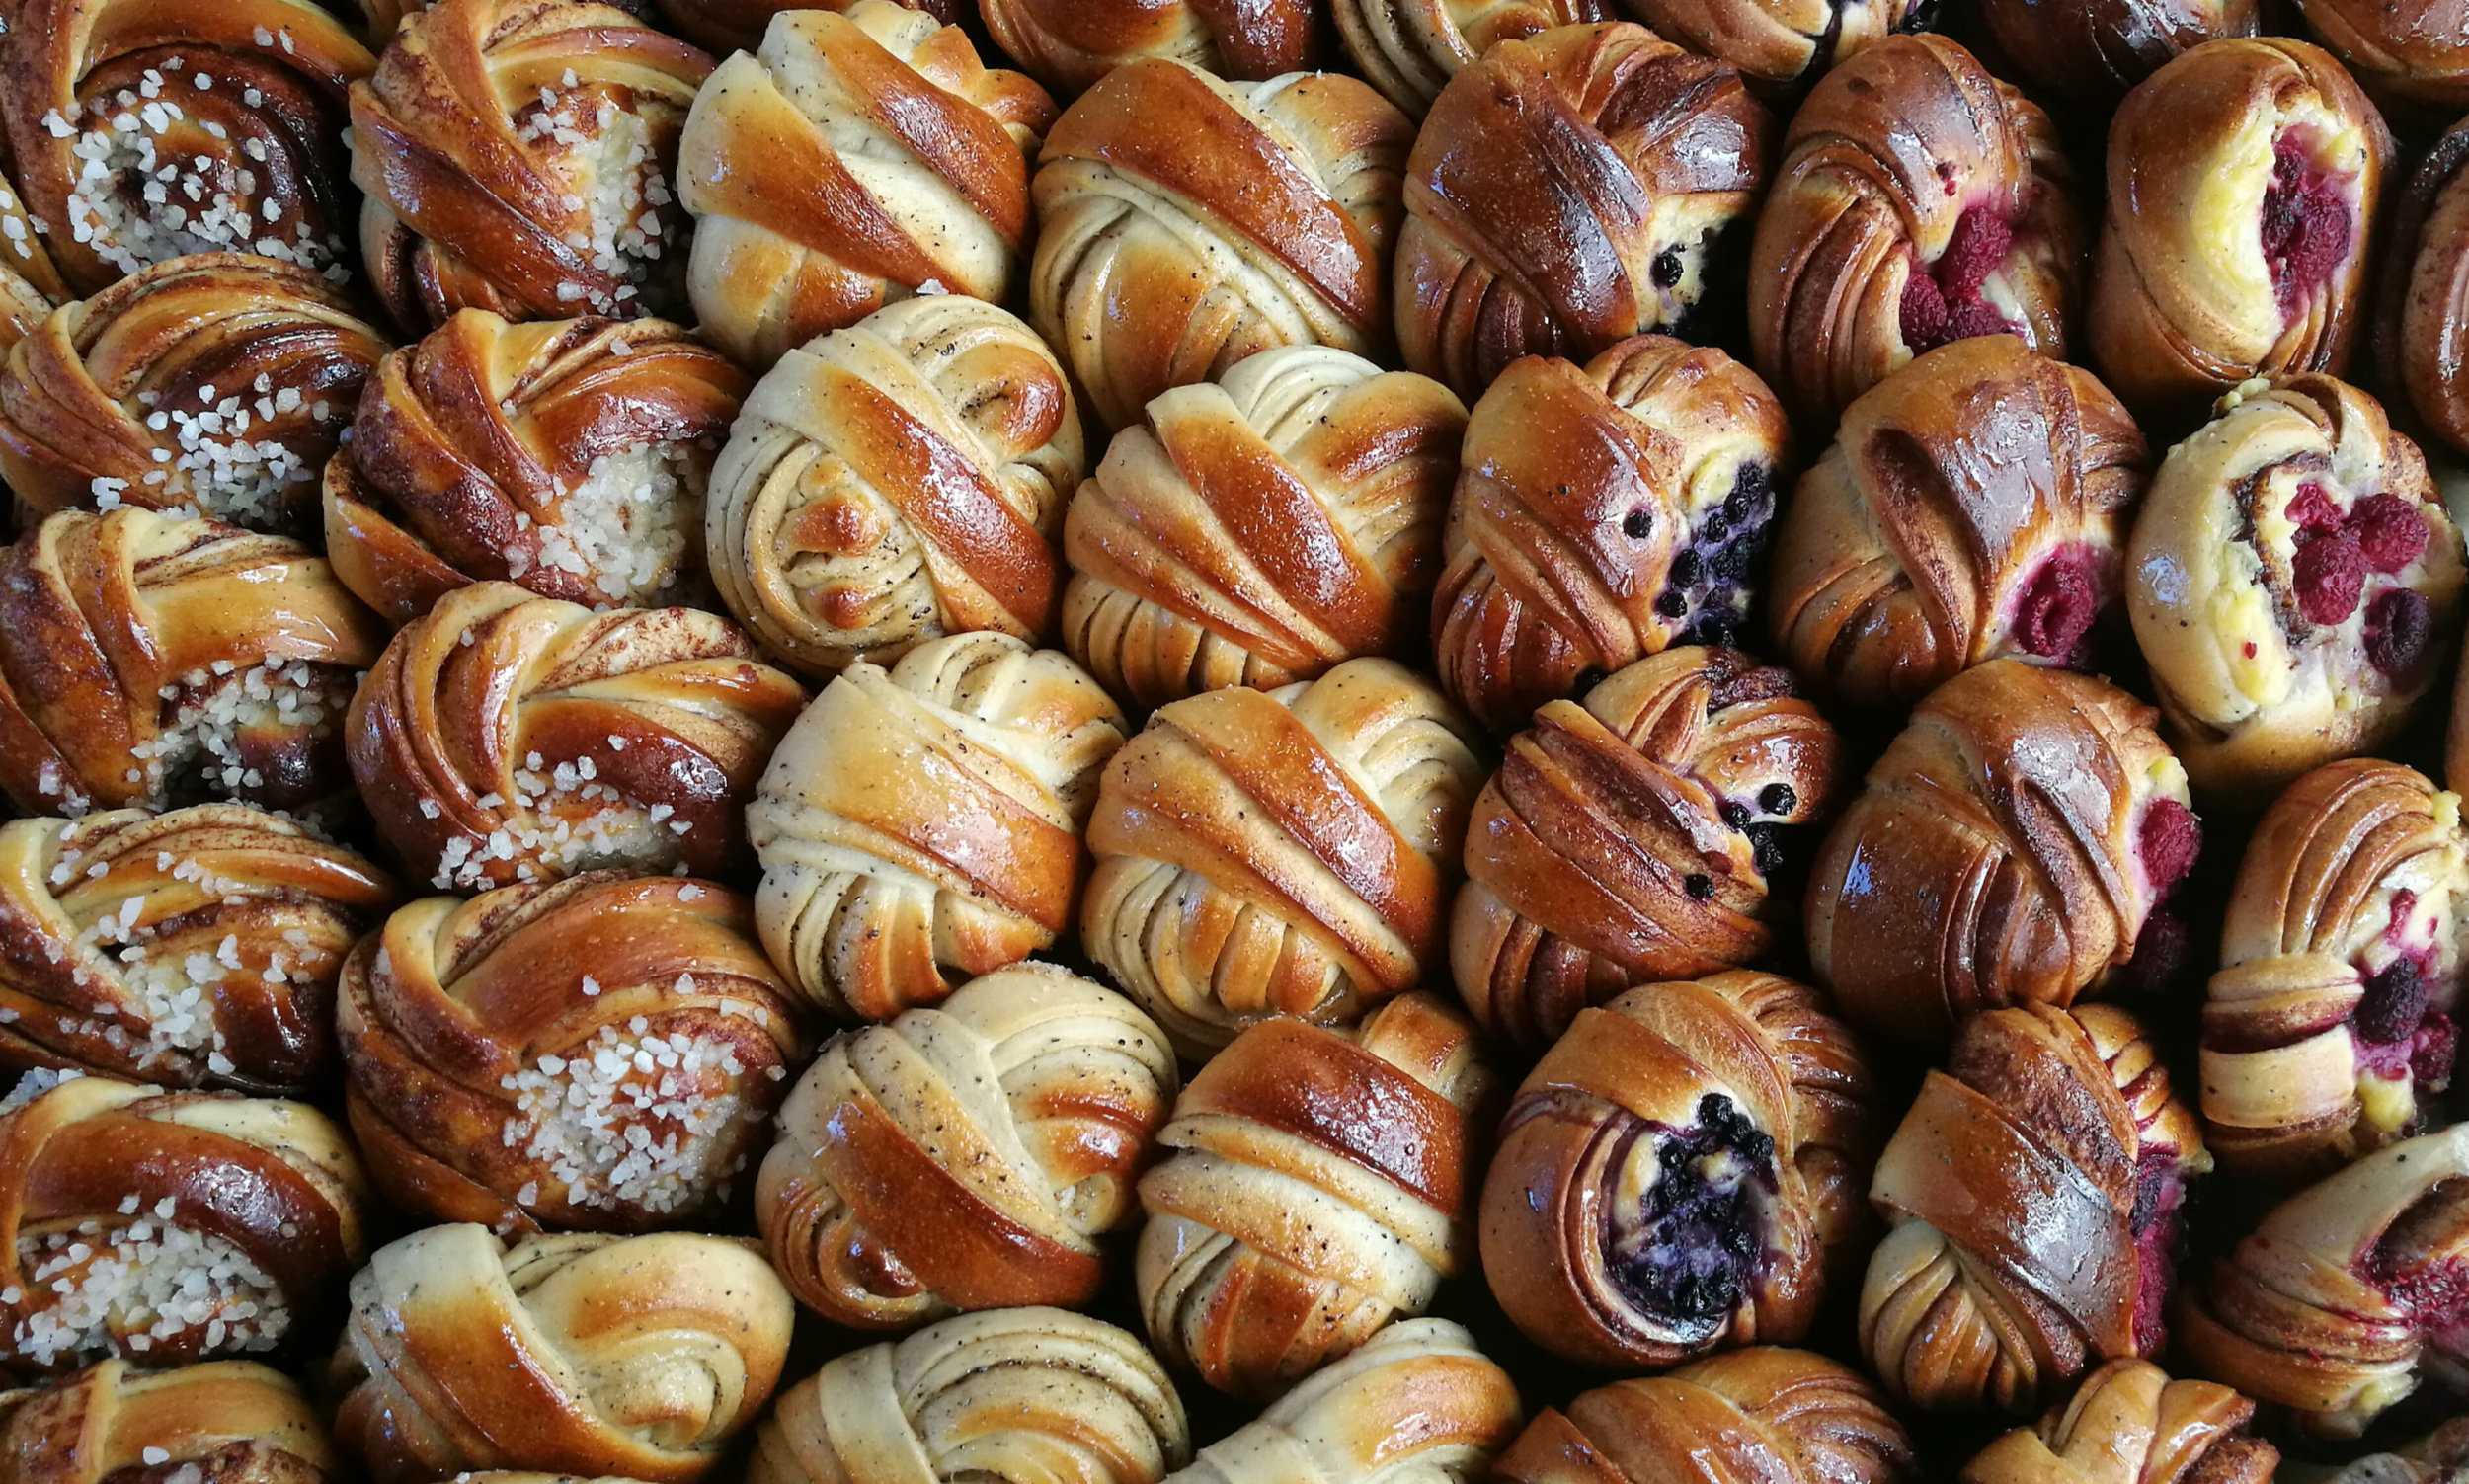 A tightly packed tray of knotted Scandinavian buns, with cardamom, cinnamon, vanilla, and raspberry